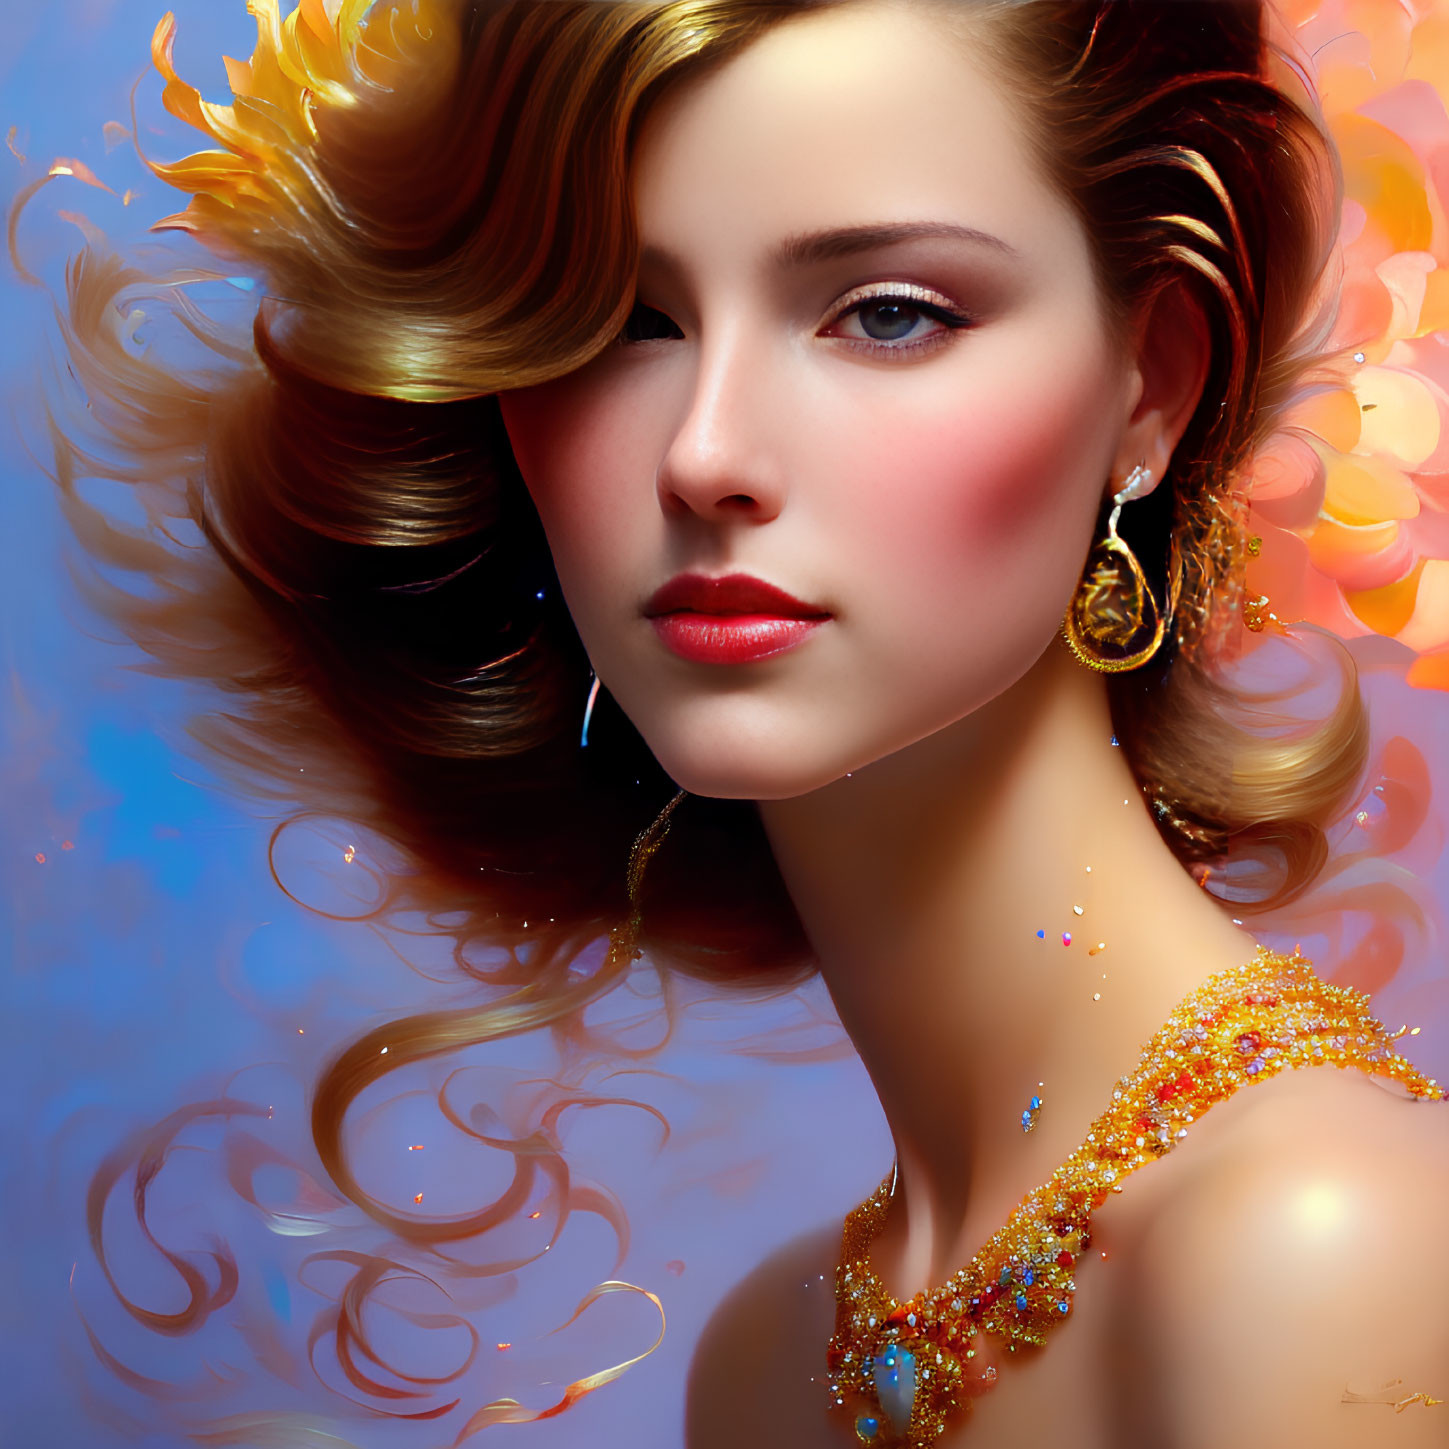 Vibrant digital artwork of a woman with flowing hair and sparkling jewelry